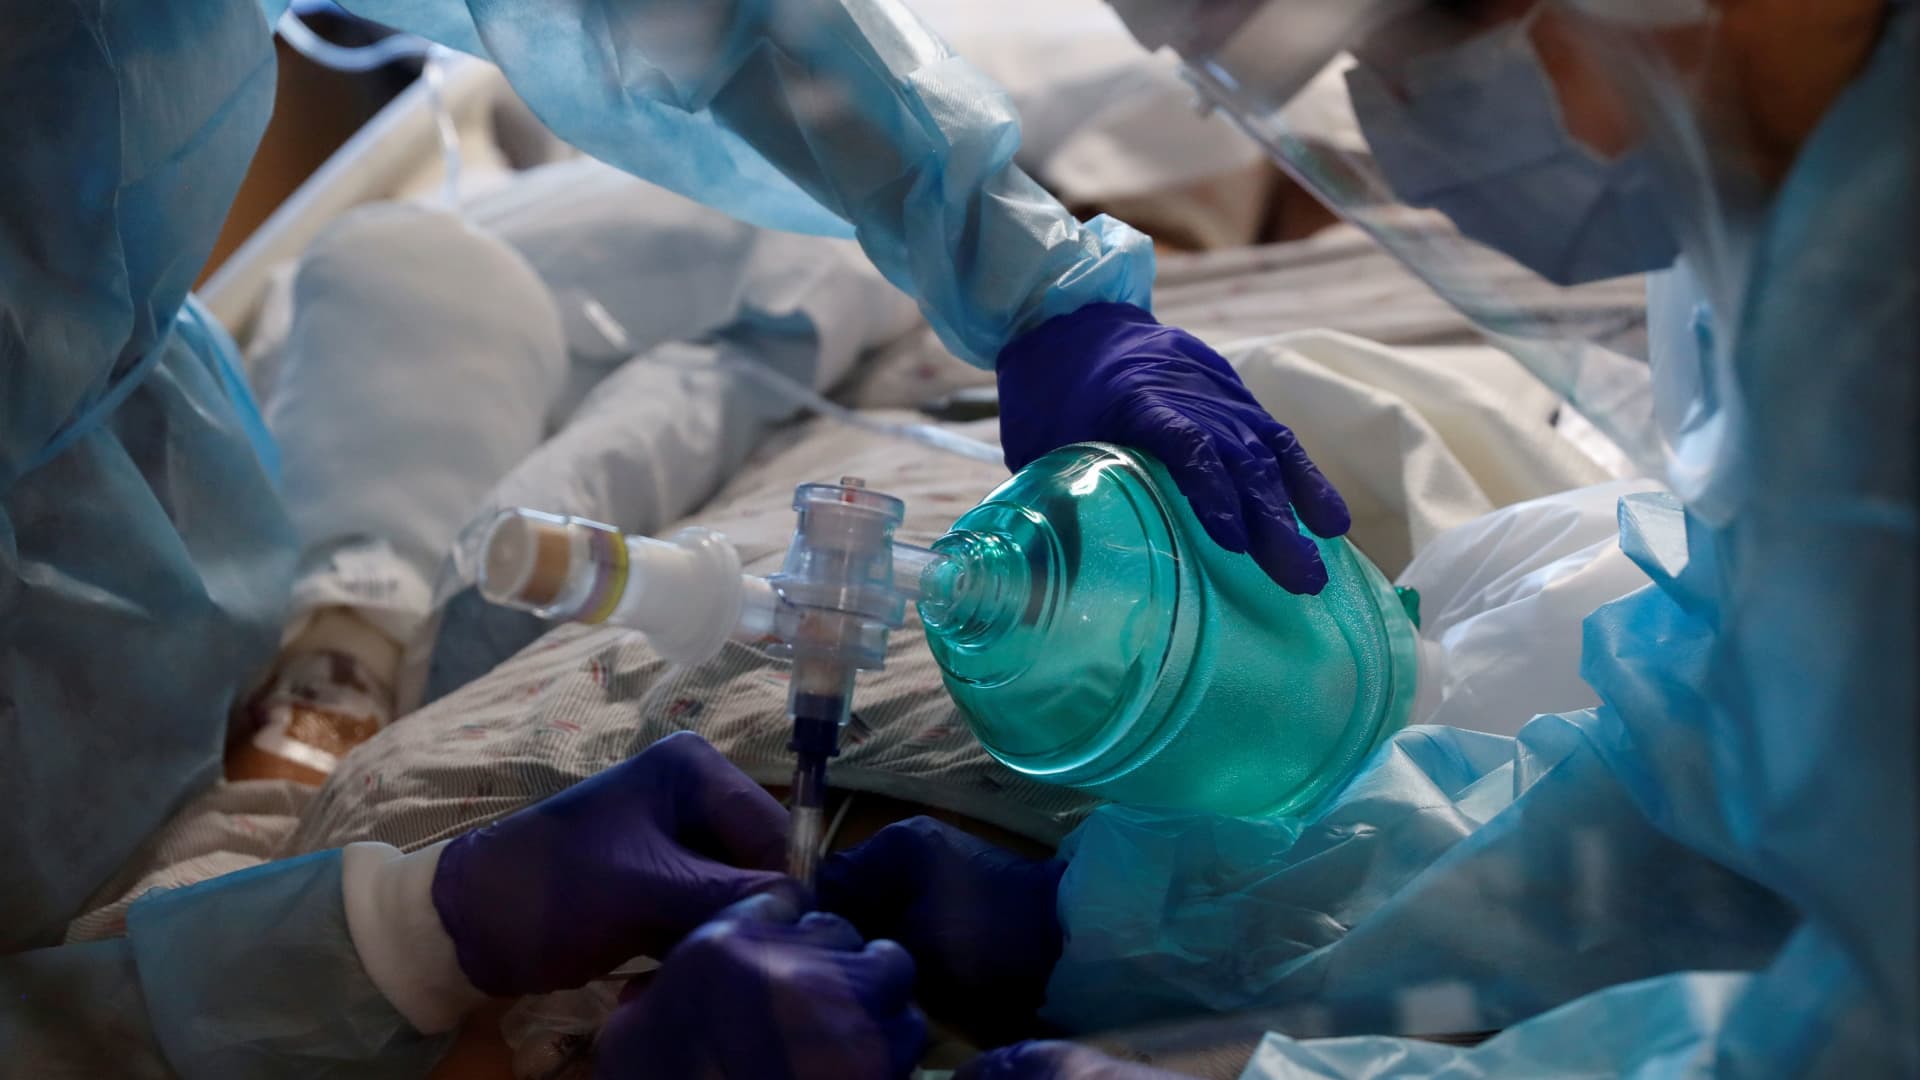 Critical care workers insert an endotracheal tube into a coronavirus disease (COVID-19) positive patient in the intensive care unit (ICU) at Sarasota Memorial Hospital in Sarasota, Florida, February 11, 2021.